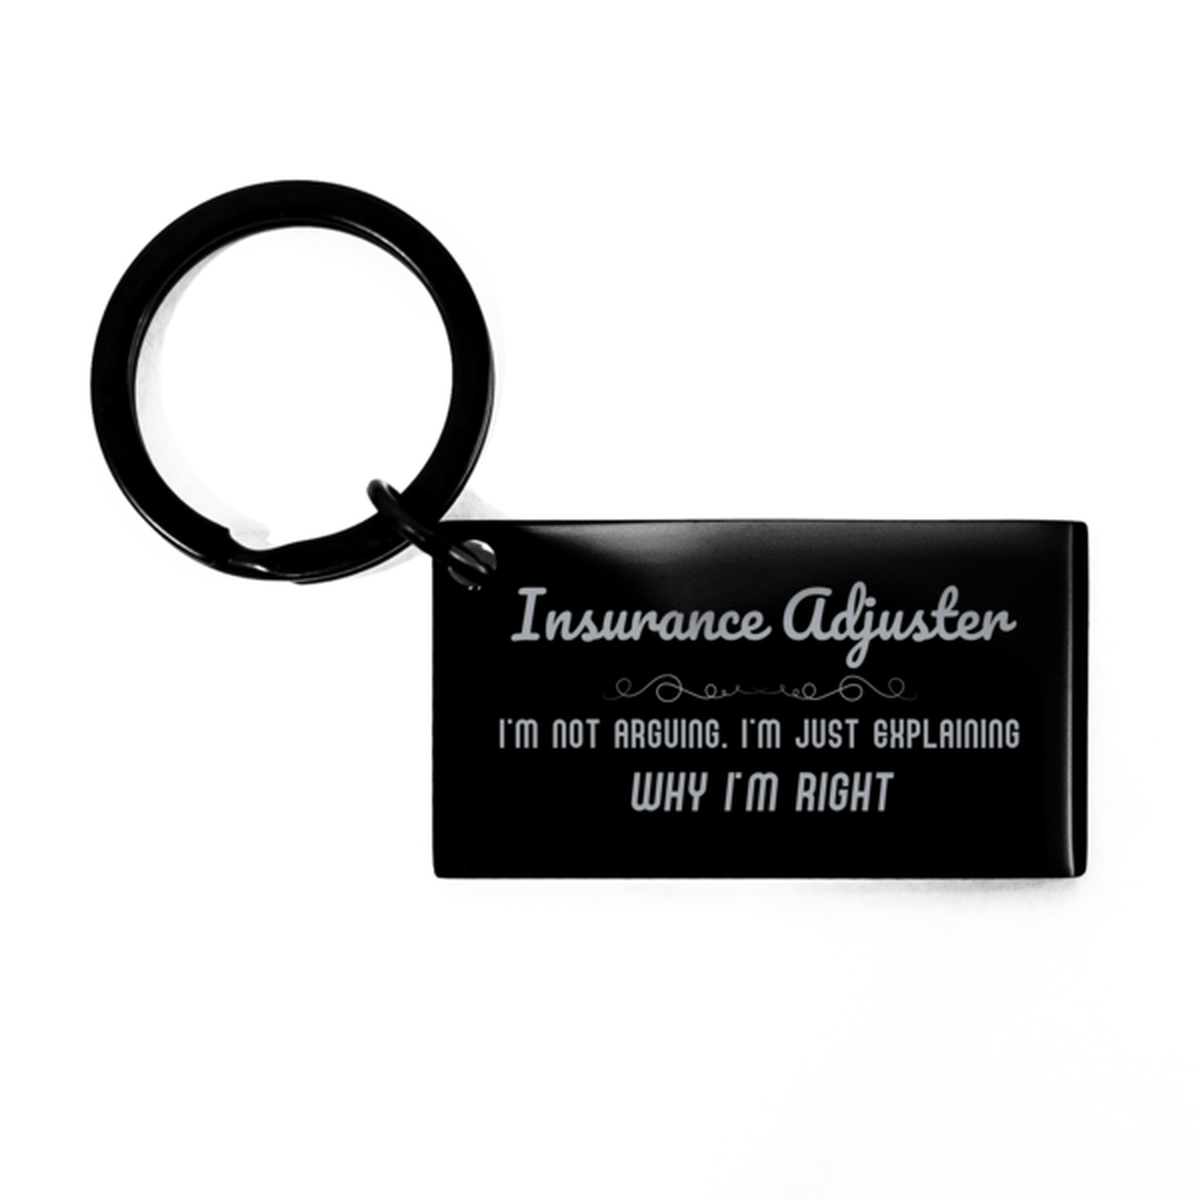 Insurance Adjuster I'm not Arguing. I'm Just Explaining Why I'm RIGHT Keychain, Funny Saying Quote Insurance Adjuster Gifts For Insurance Adjuster Graduation Birthday Christmas Gifts for Men Women Coworker